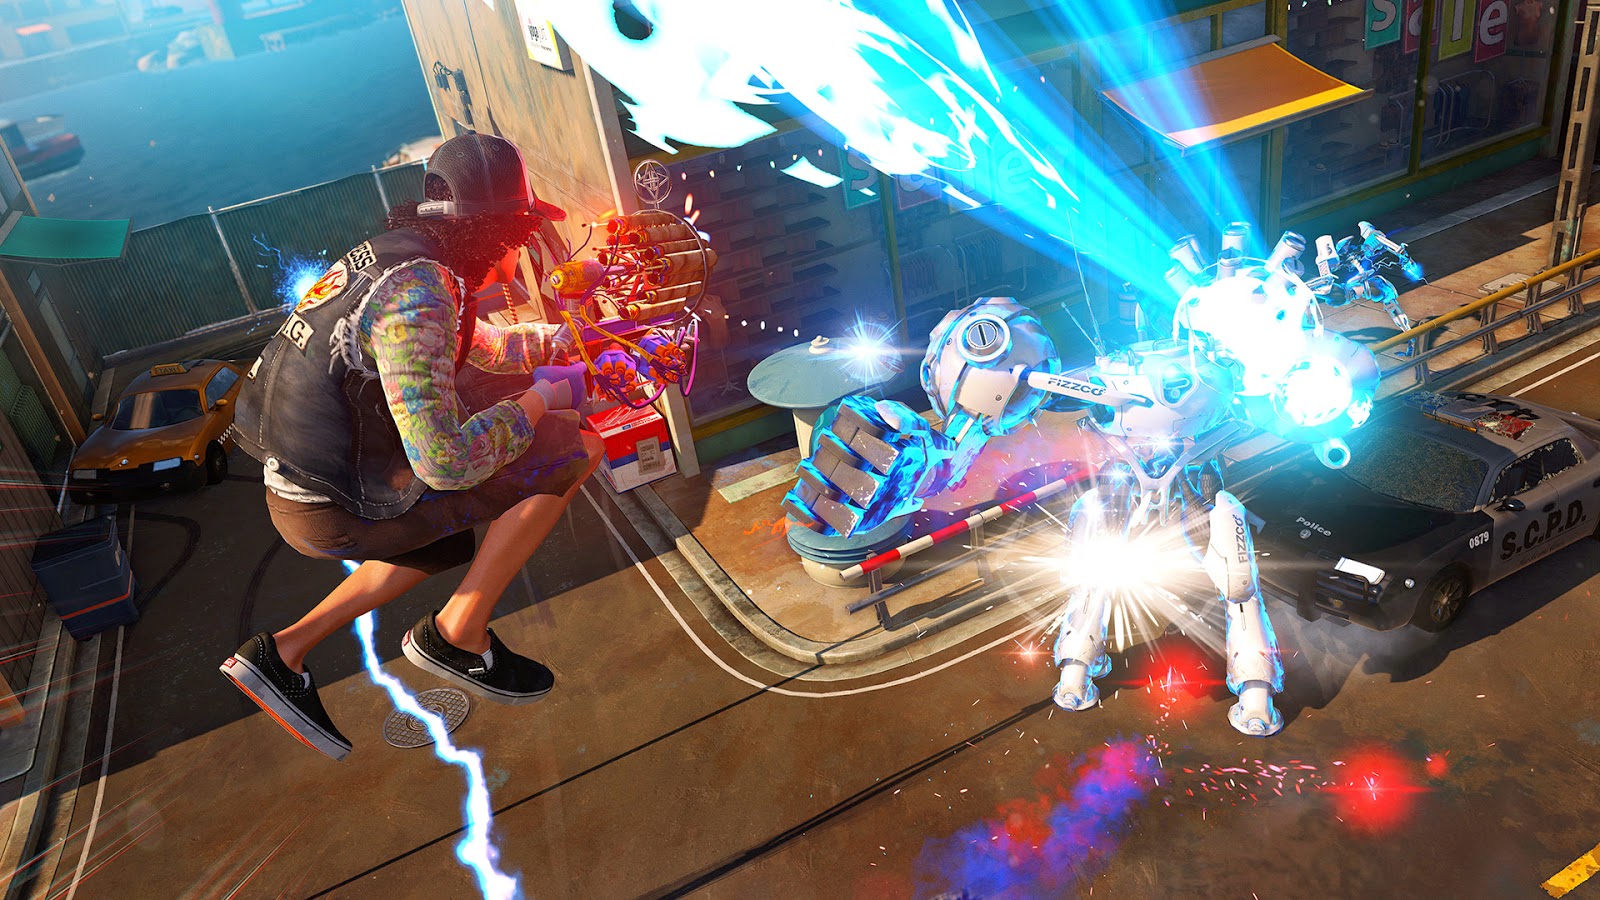 Sunset Overdrive tries too hard to make you love it